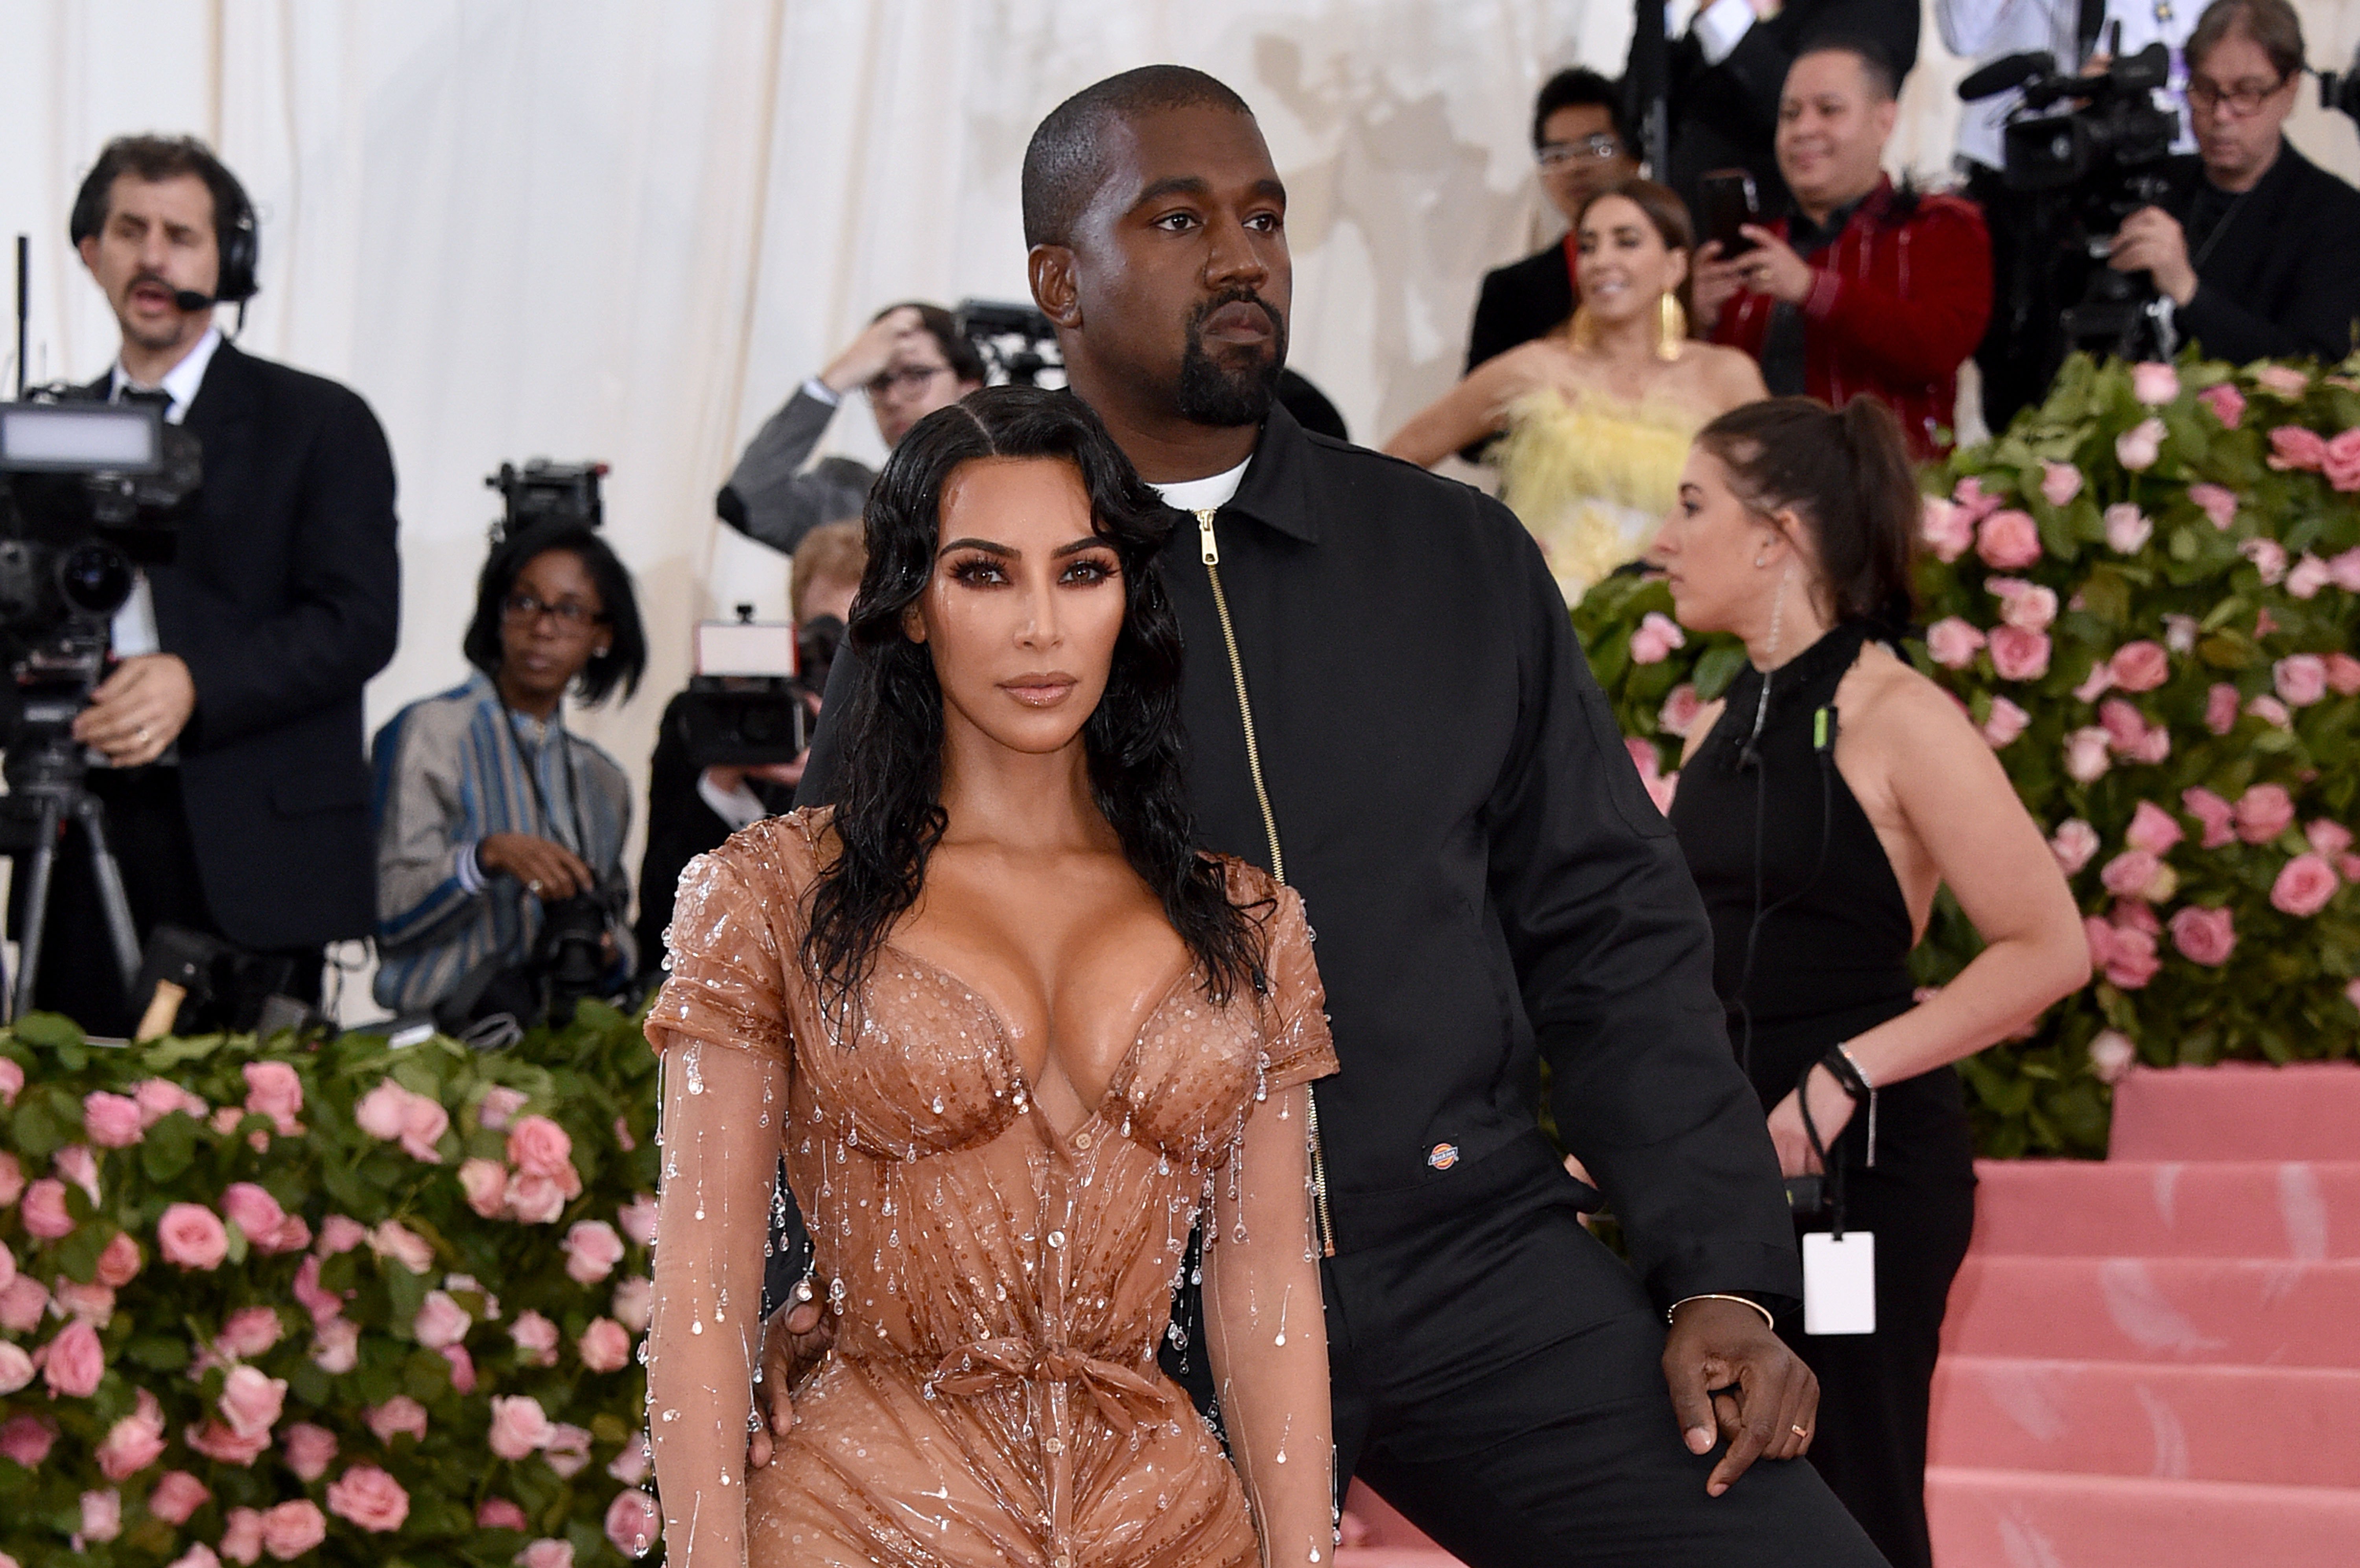 Kanye West and Kim Kardashian on the red carpet at the 2019 Met Gala, New York. | Photo: Getty Images